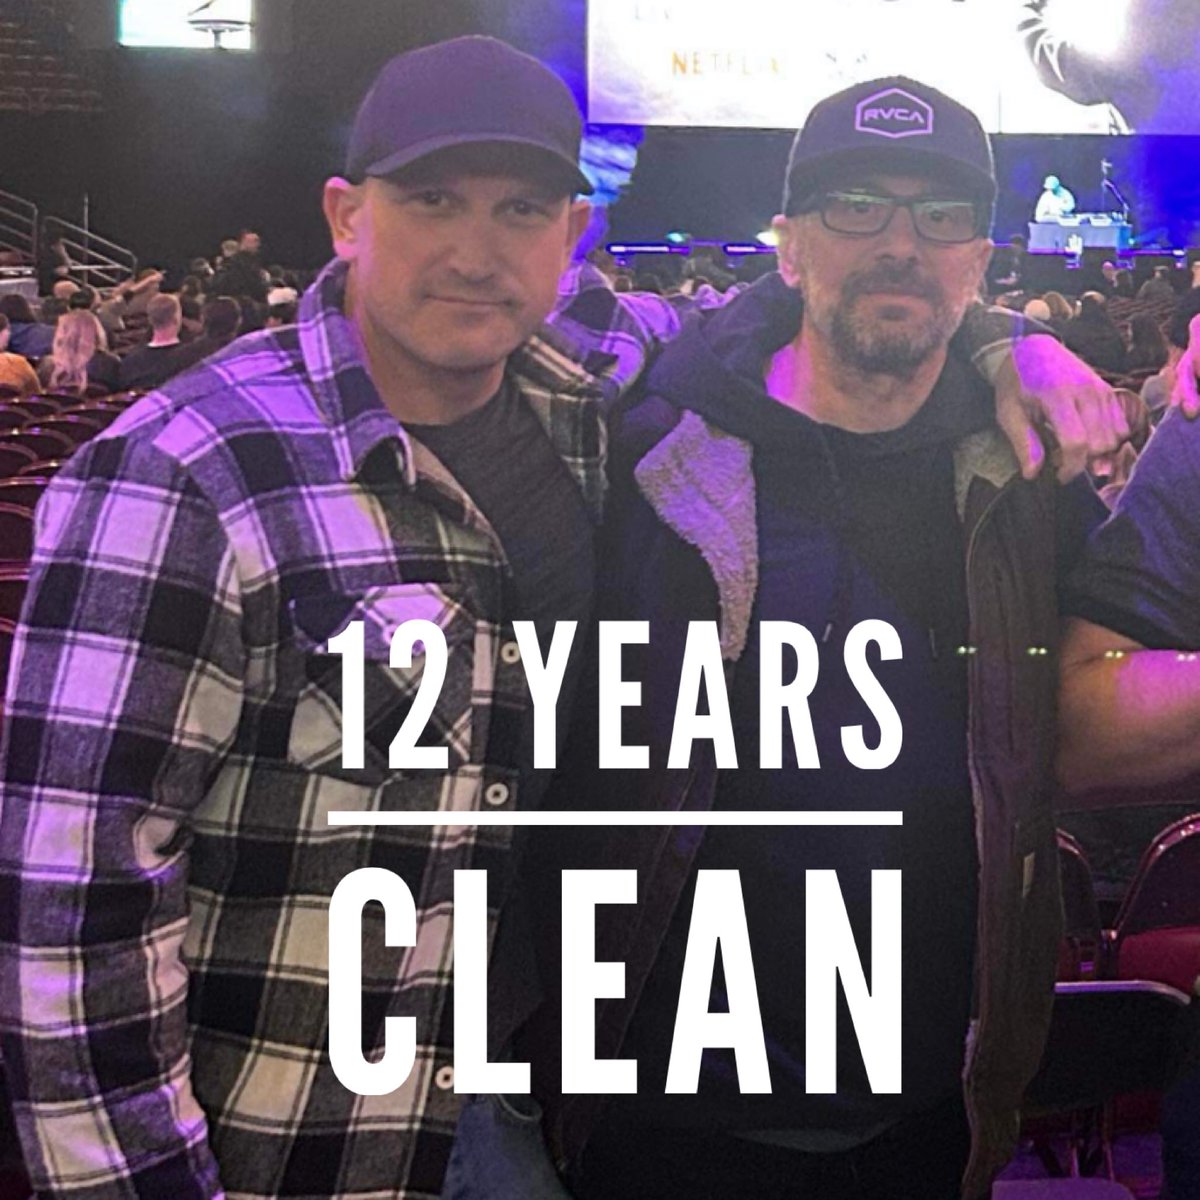 Congratulations Alumni Tom and Jason on your 12 years clean! Ann my amazing work you two, and thanks for staying connected. #NewWestRecovery #WeDoRecover